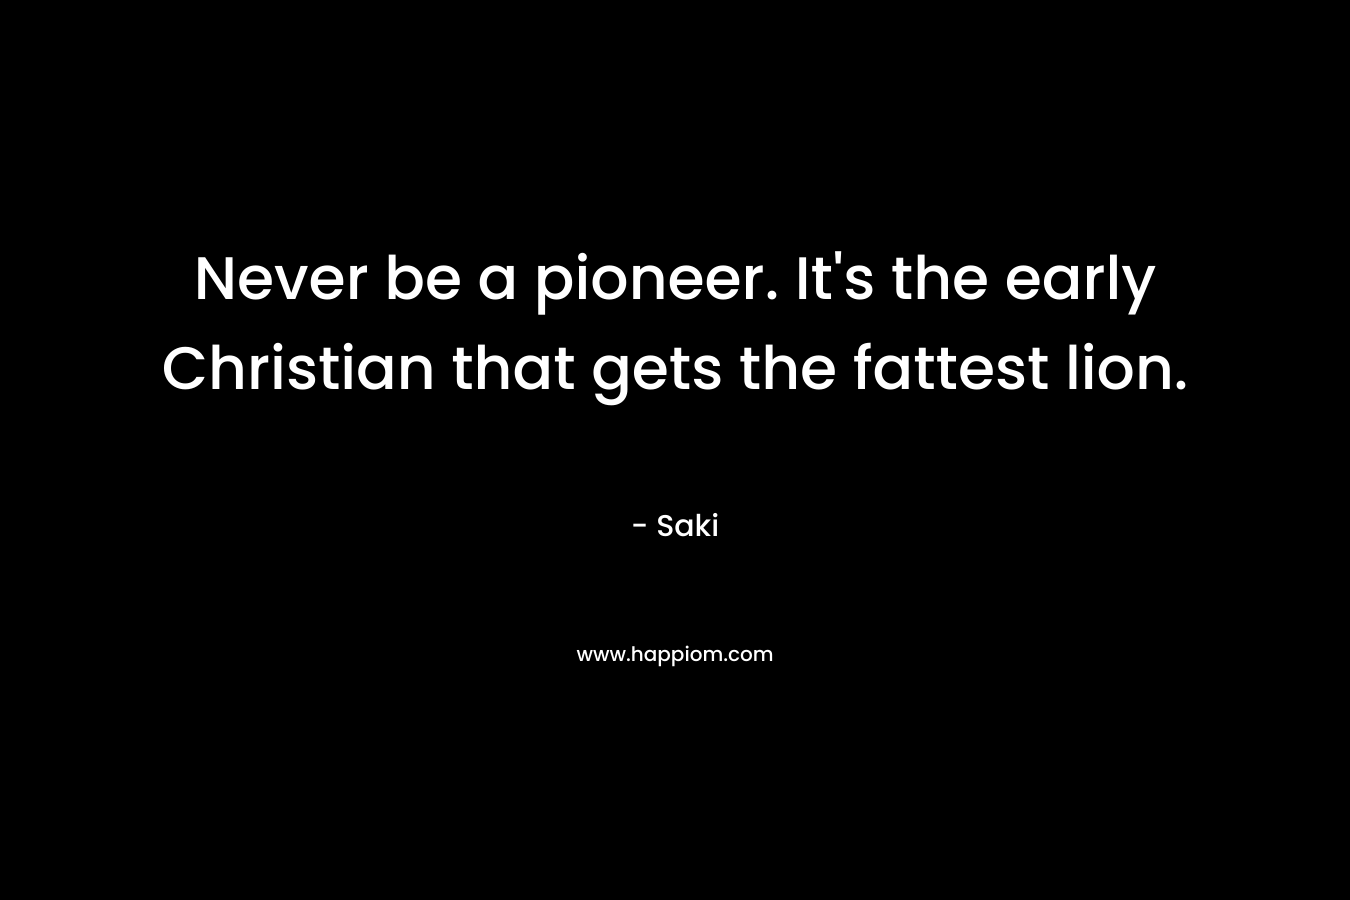 Never be a pioneer. It’s the early Christian that gets the fattest lion. – Saki